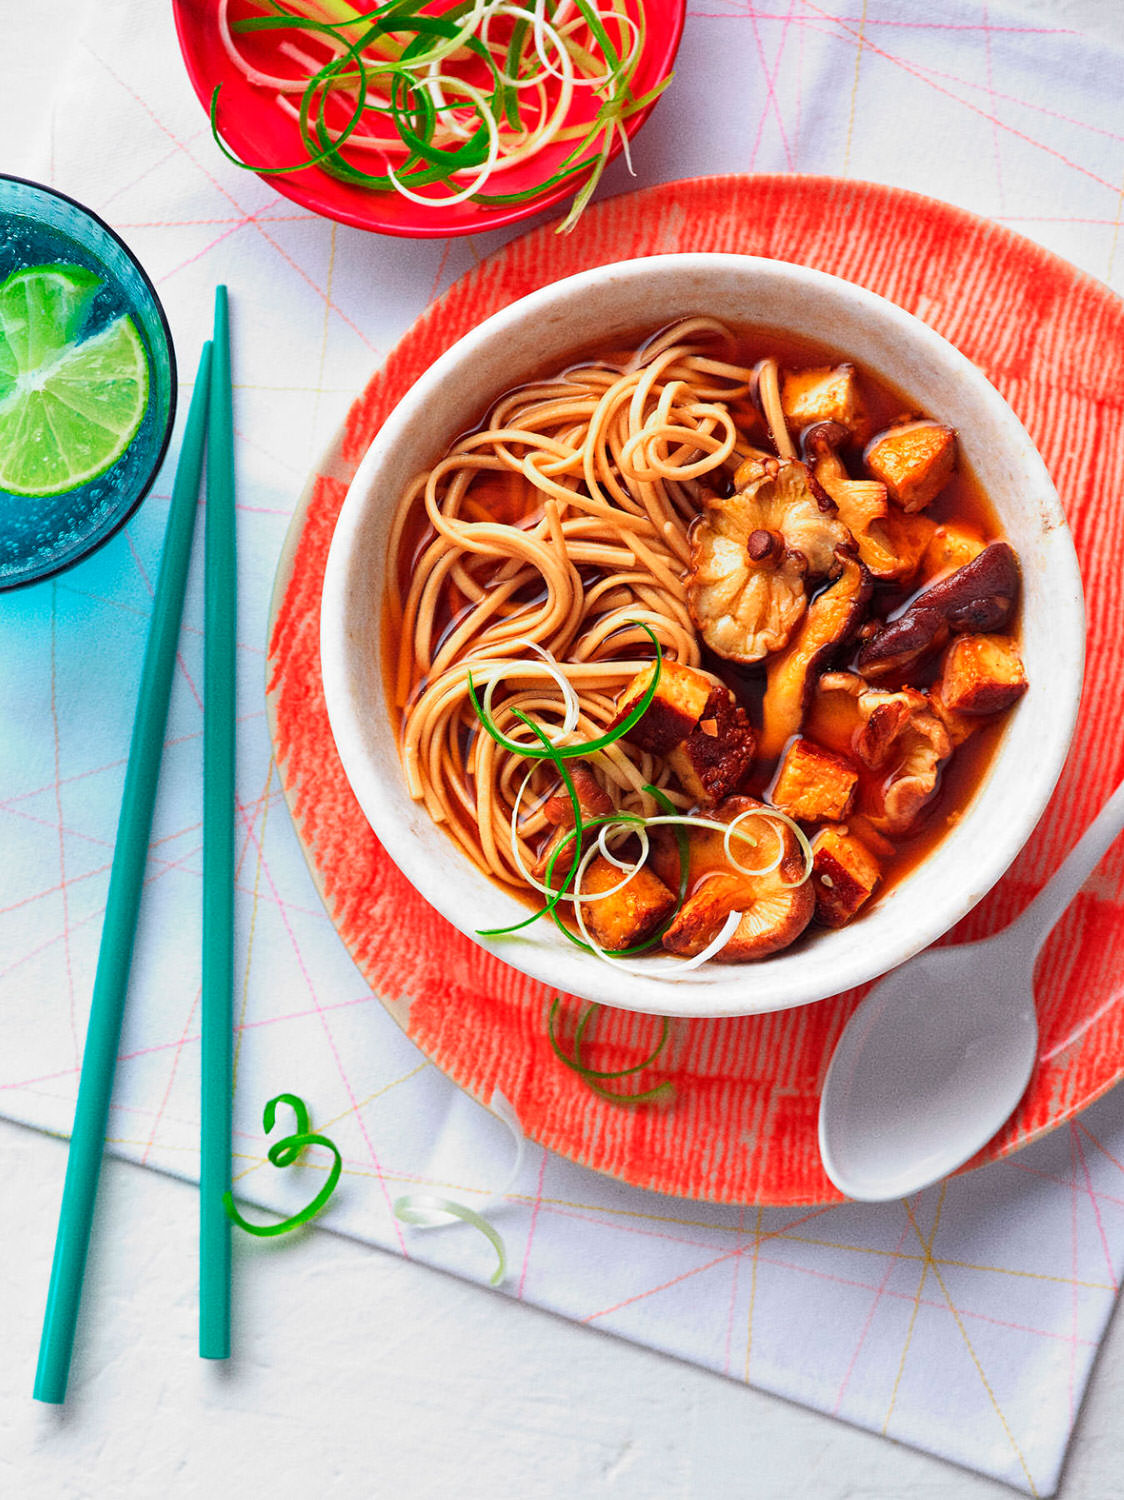 Miso Noodle Soup in asian style bowl with chopsticks - London Food & Drinks Photographer